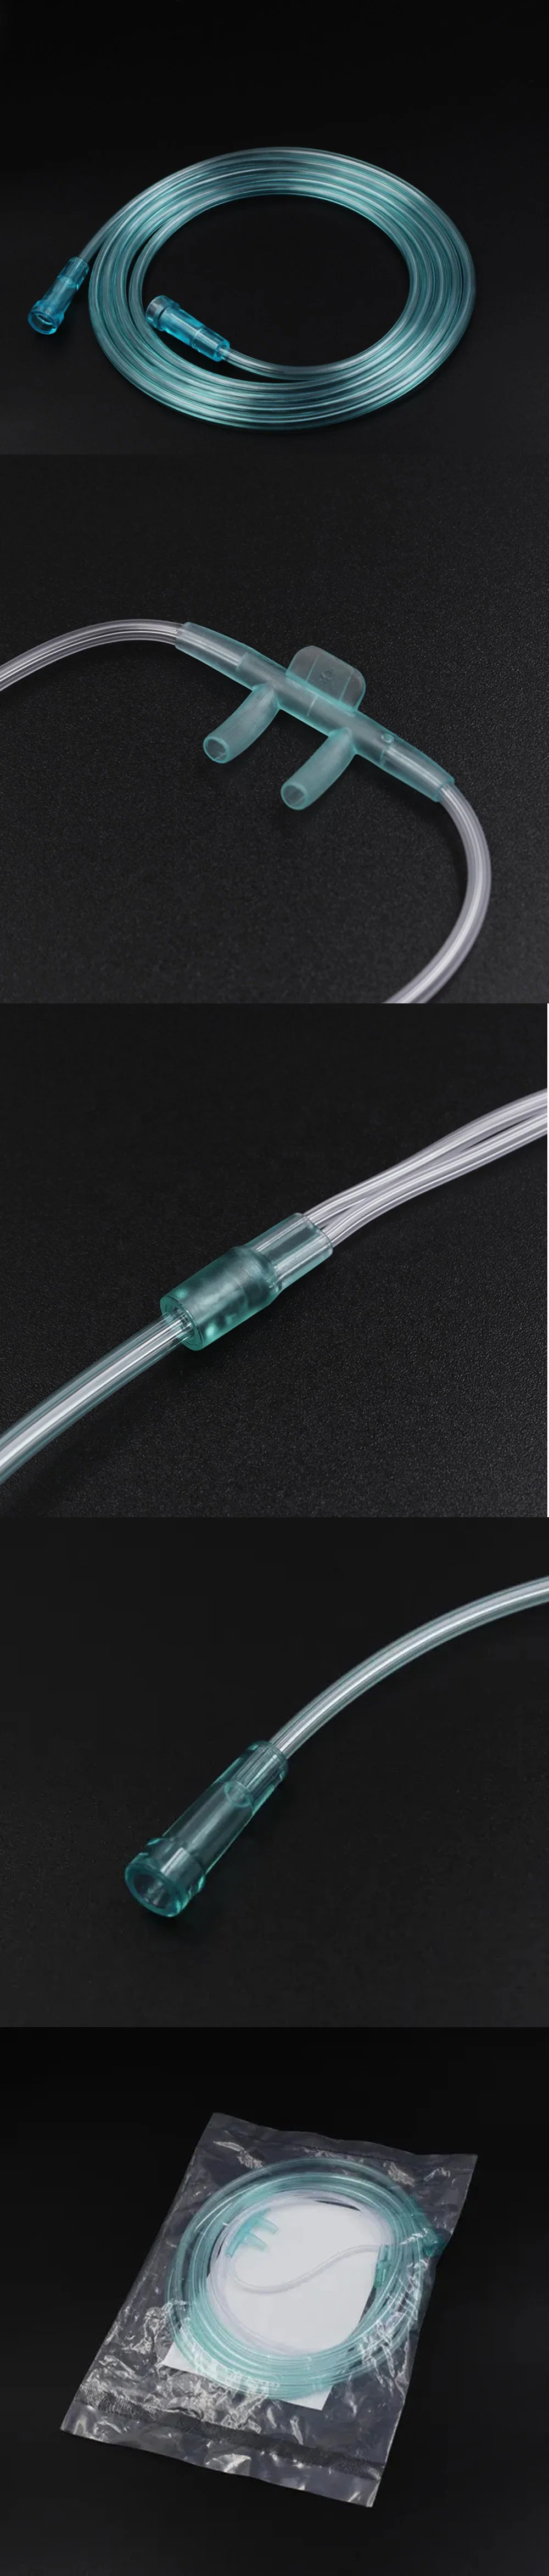 Nasal Oxygen Cannula 1.5m Hot Sale PVC Oxygen Soft-Tip Nasal Cannula for Adult/Child/Infant with CE, ISO